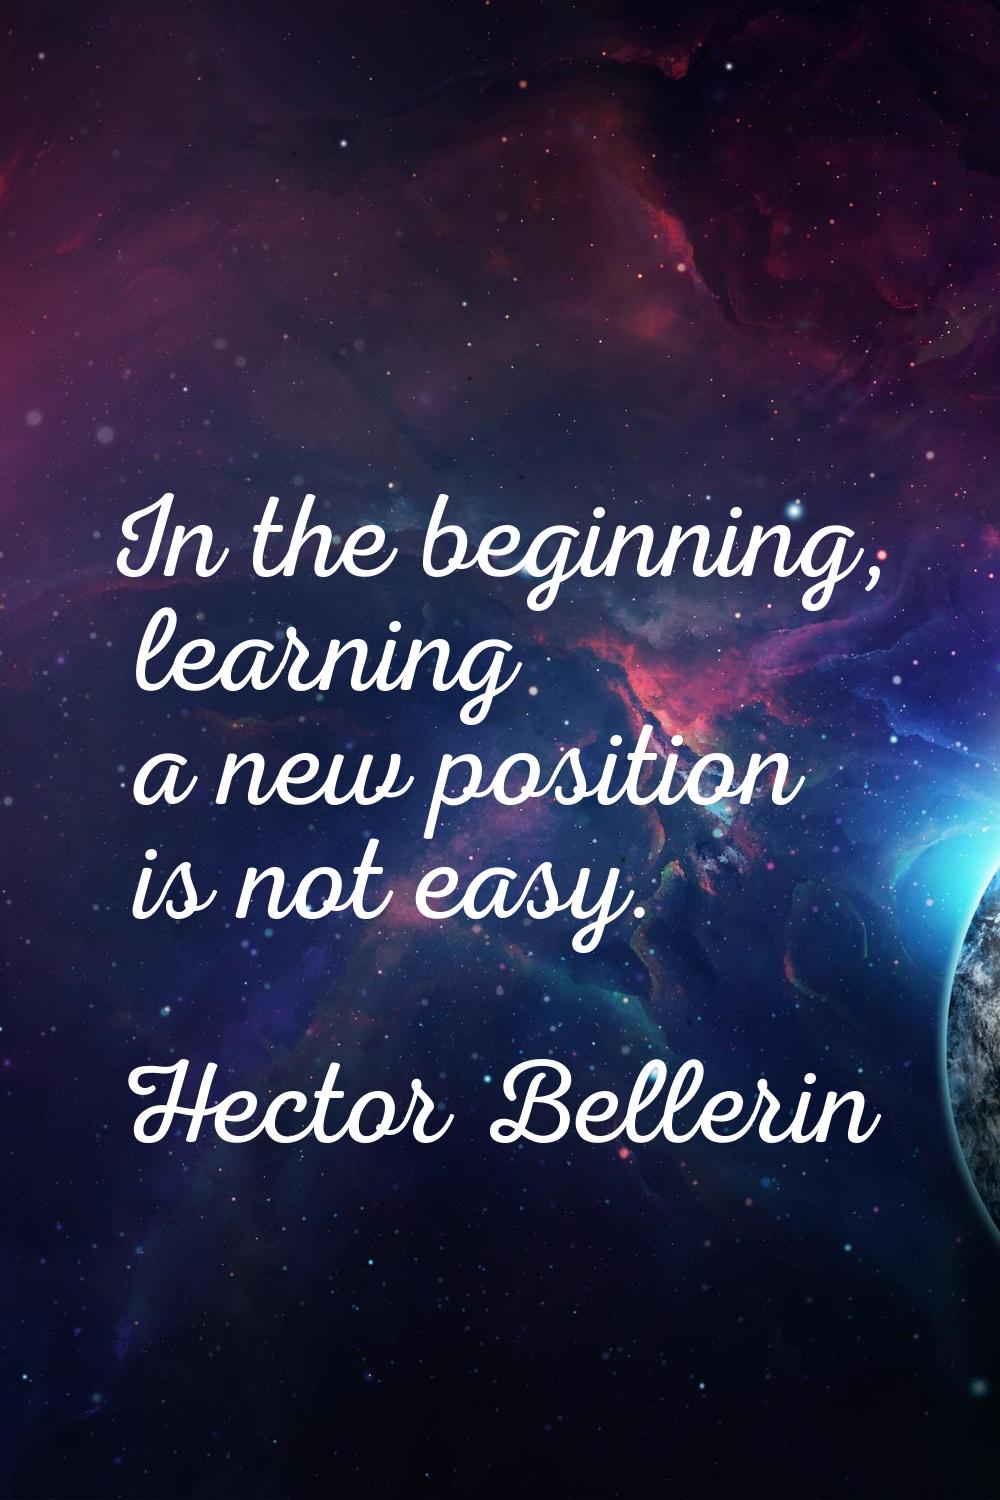 In the beginning, learning a new position is not easy.